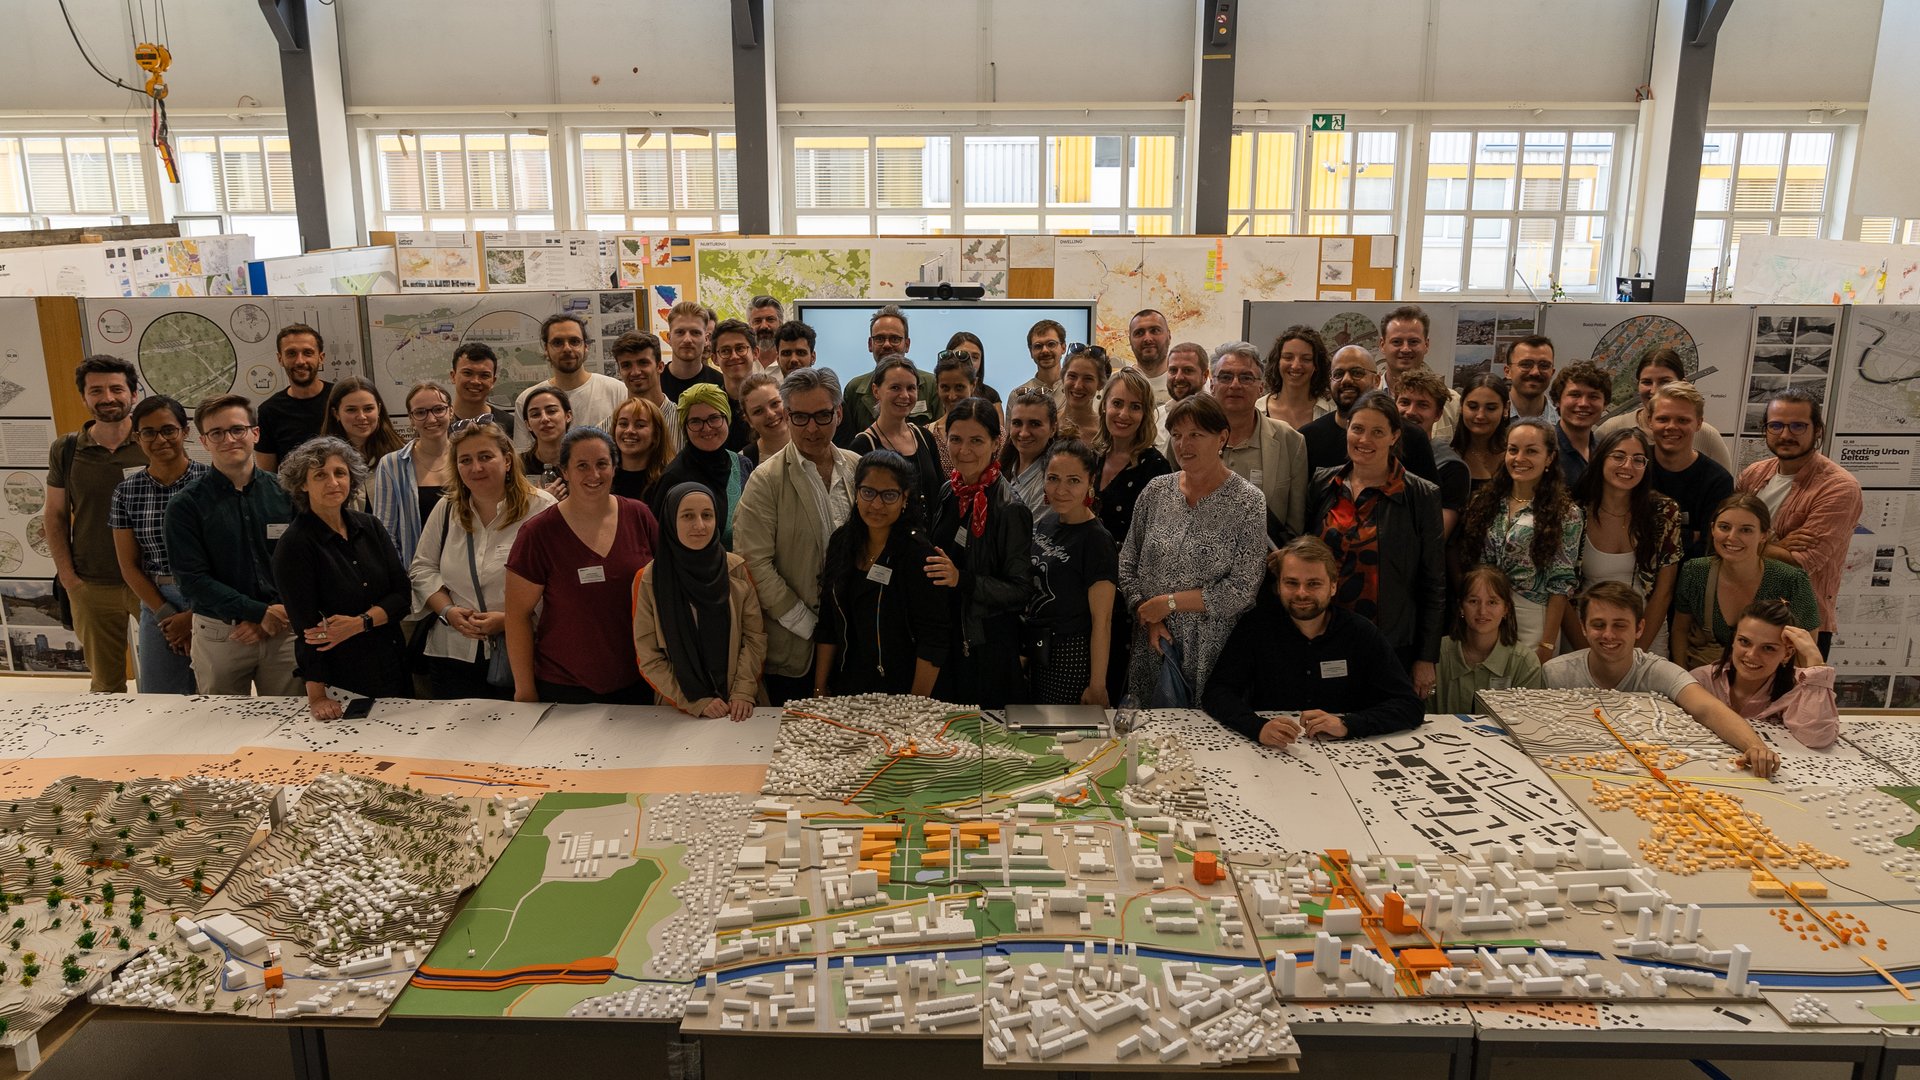 Participants stand in front of the physical model of the city during the design studio in Sarajevo 2023.